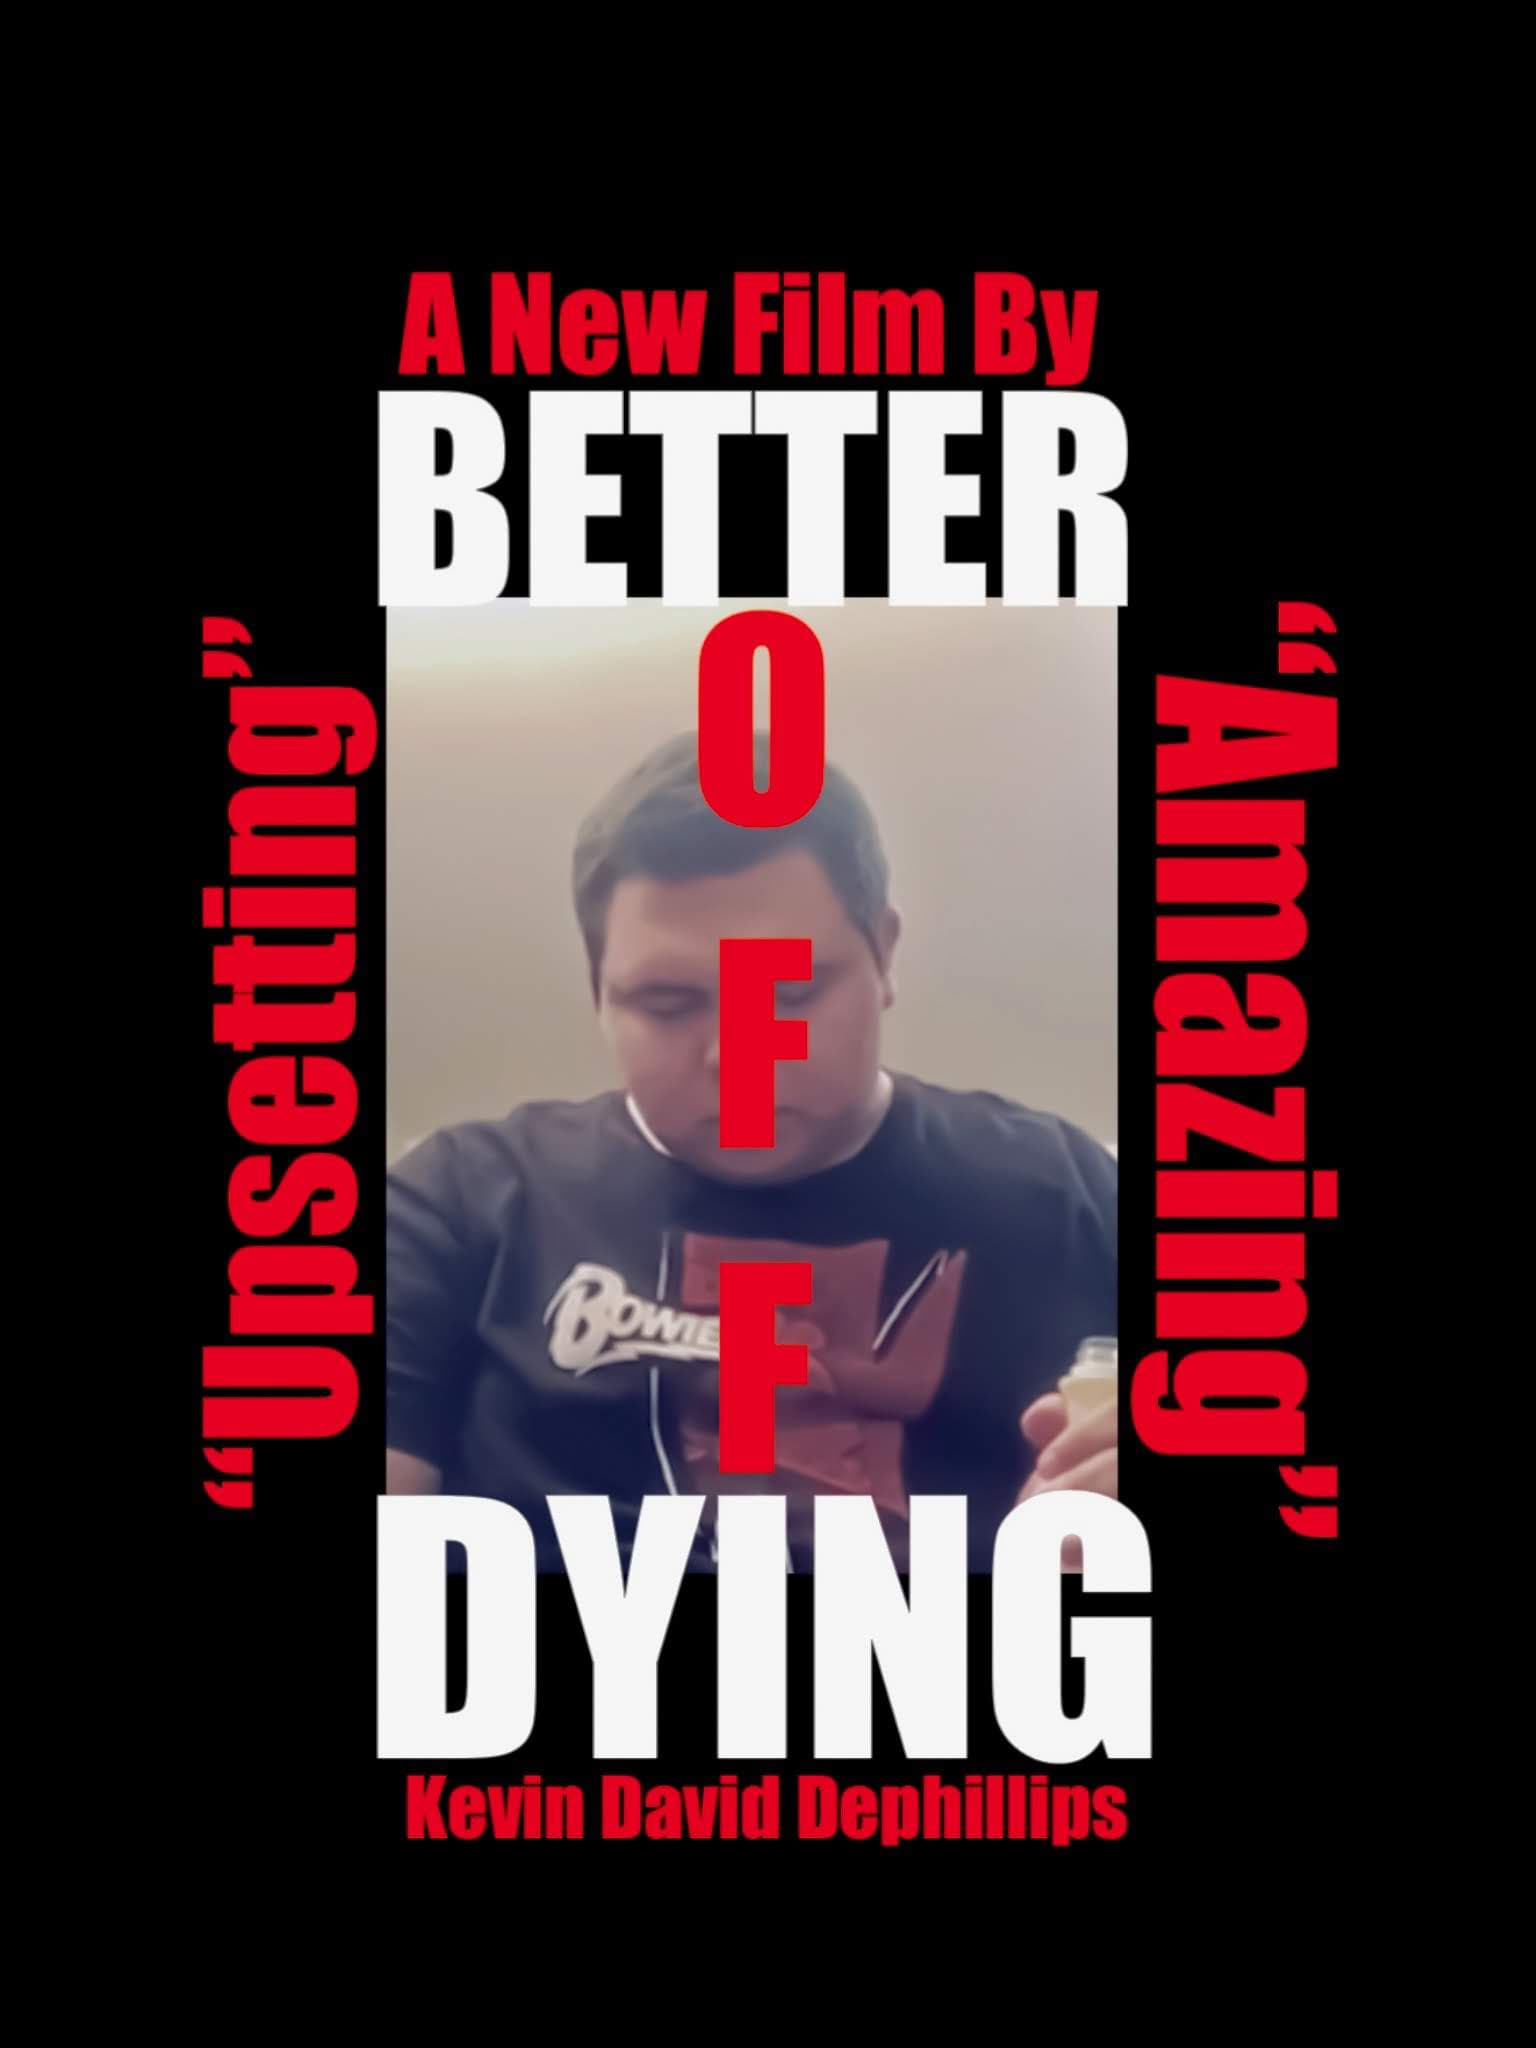 Better Off Dying